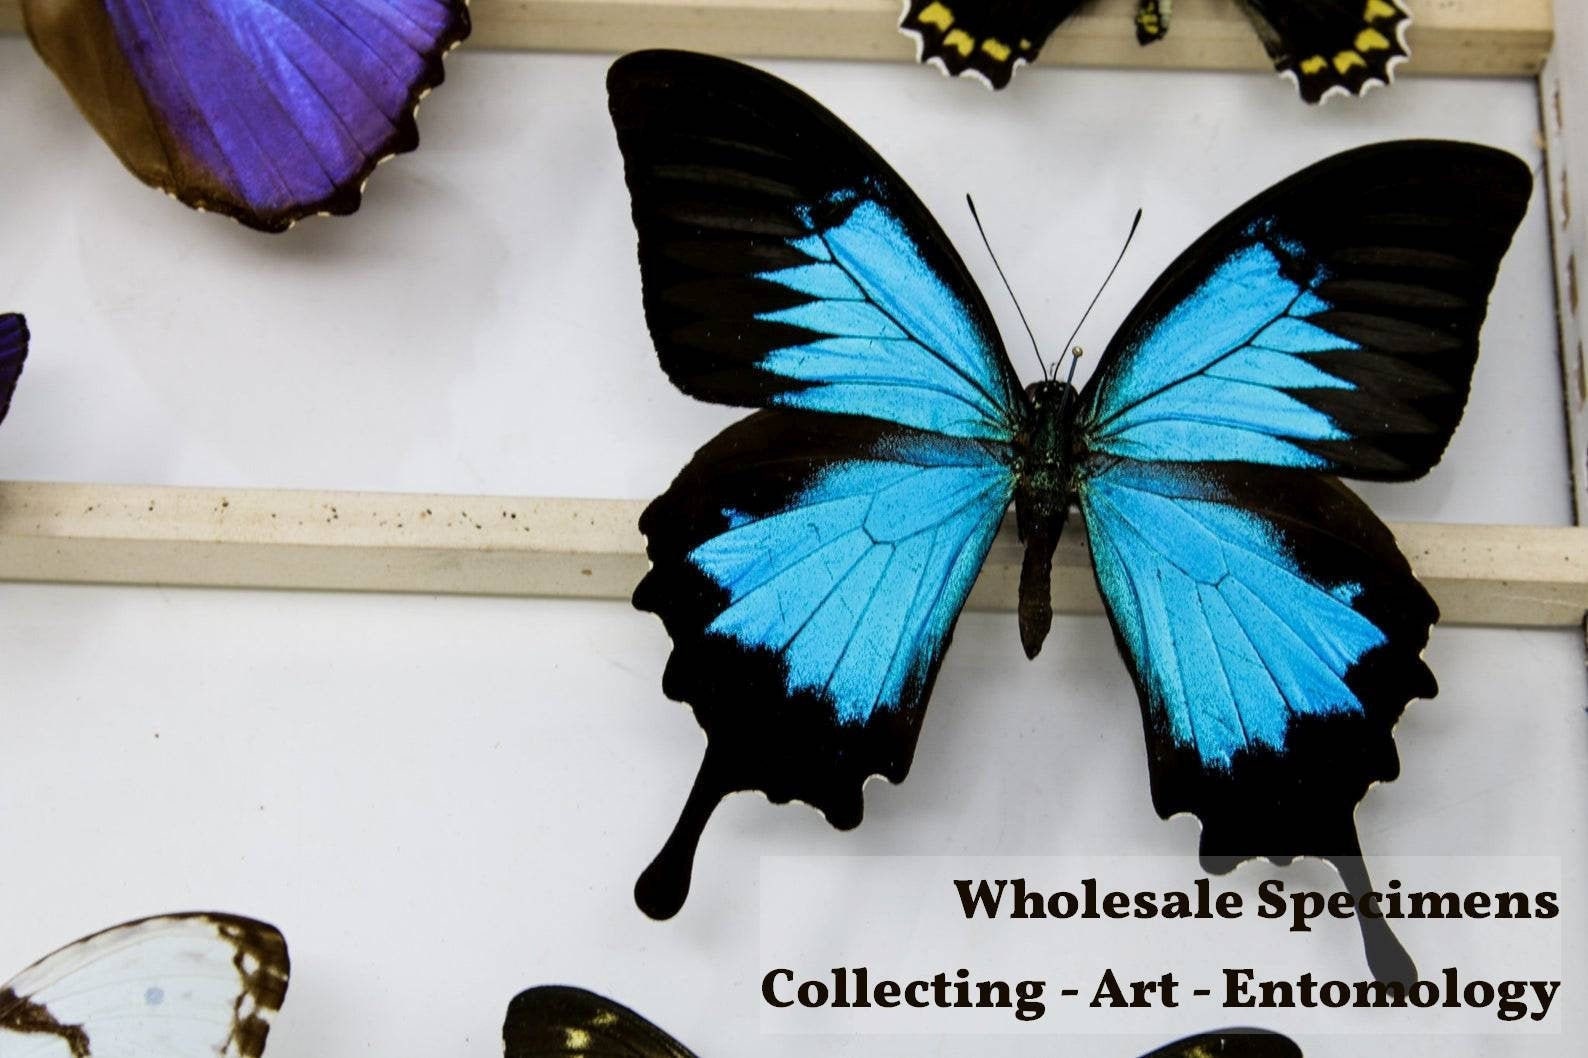 10 x Blue Swallowtail Butterflies (Papilio ulysses) A1 Unmounted Specimens